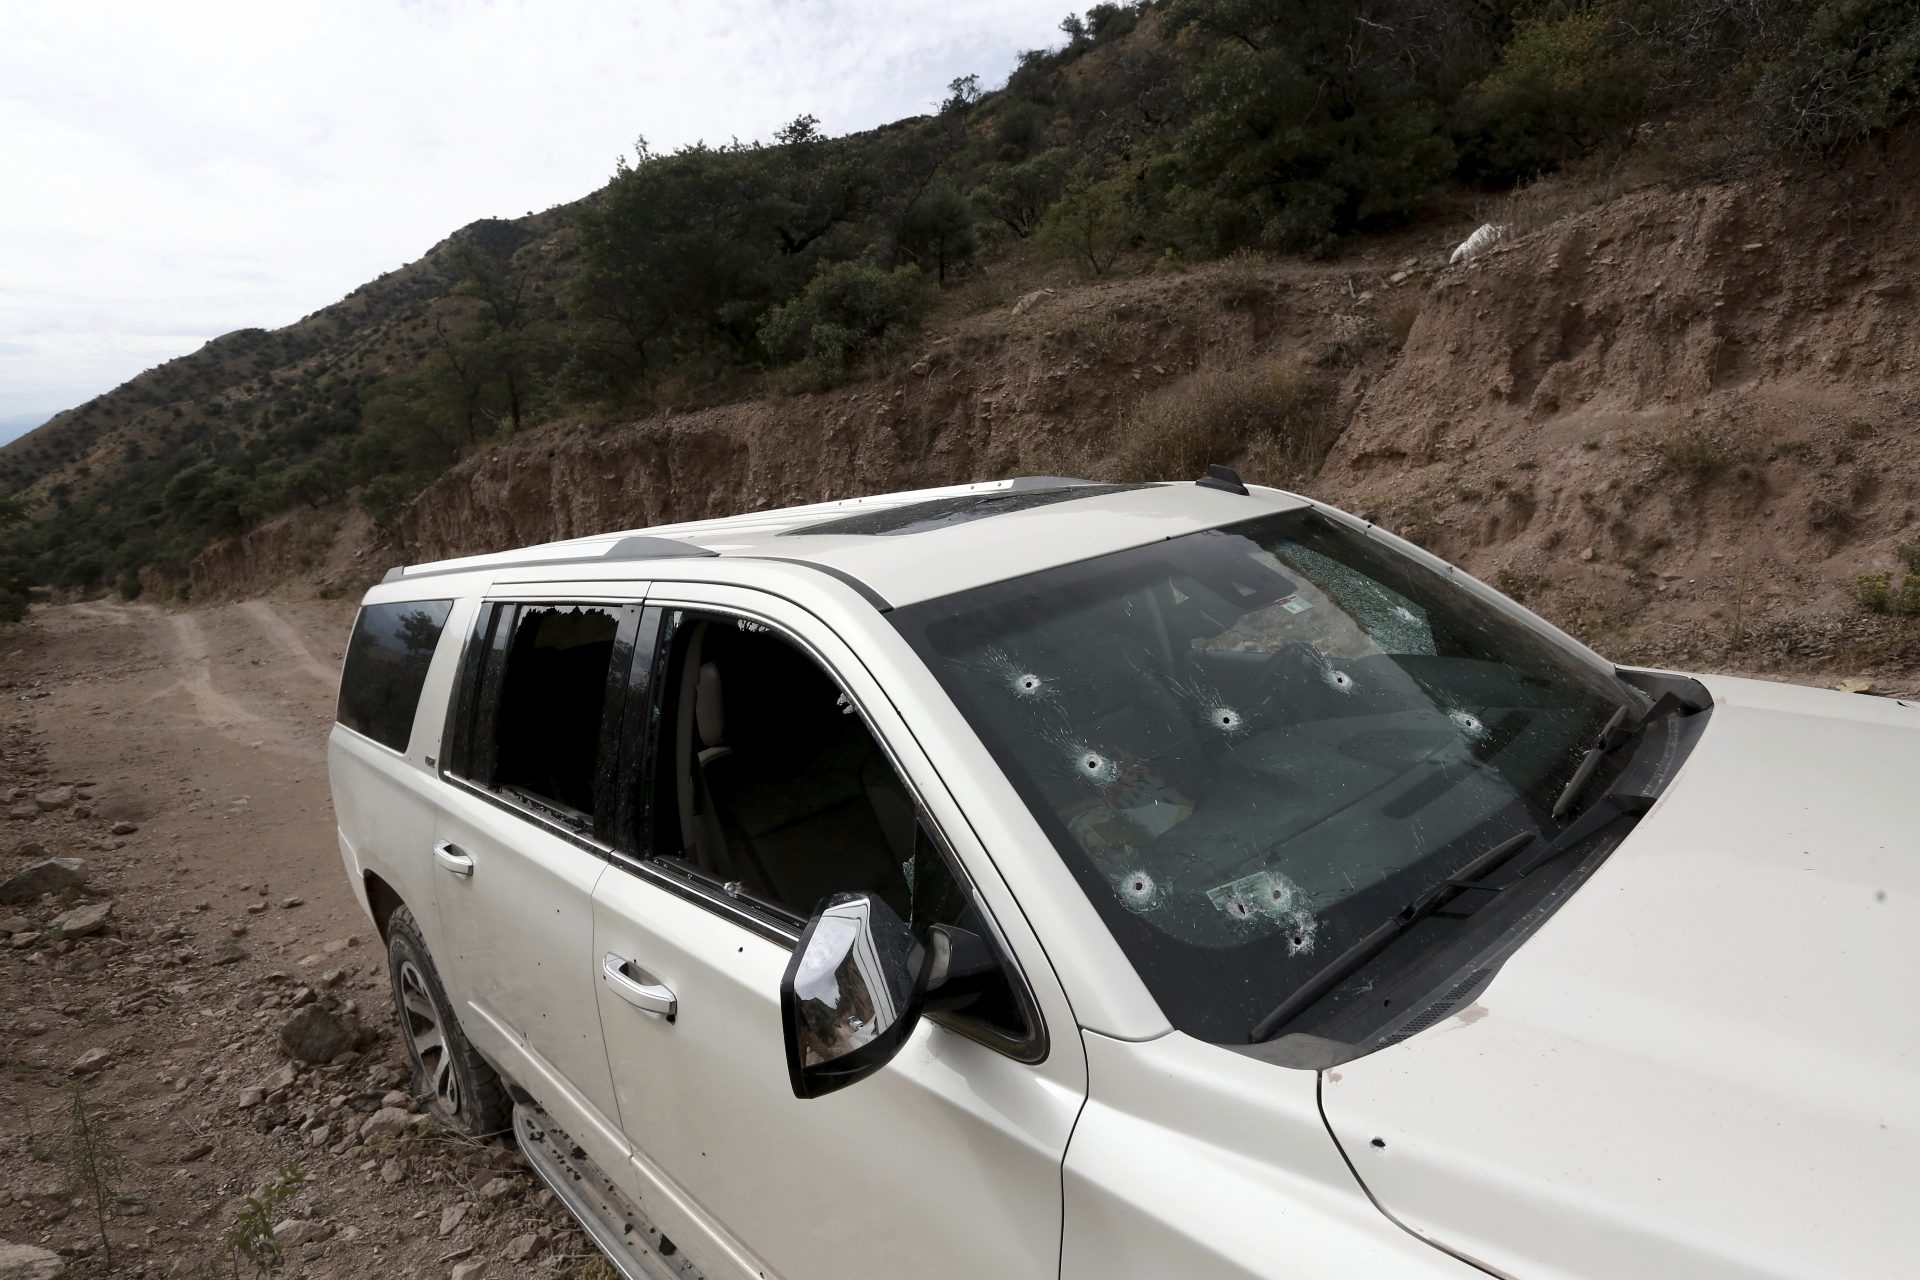 A bullet-riddled vehicle that members of LeBaron family were traveling in sits parked on a dirt road near Bavispe, at the Sonora-Chihuahua border, Mexico, Wednesday, Nov 6, 2019. Three women and six of their children, related to the extended LeBaron family, were gunned down in an attack while traveling along Mexico's Chihuahua and Sonora state border on Monday.